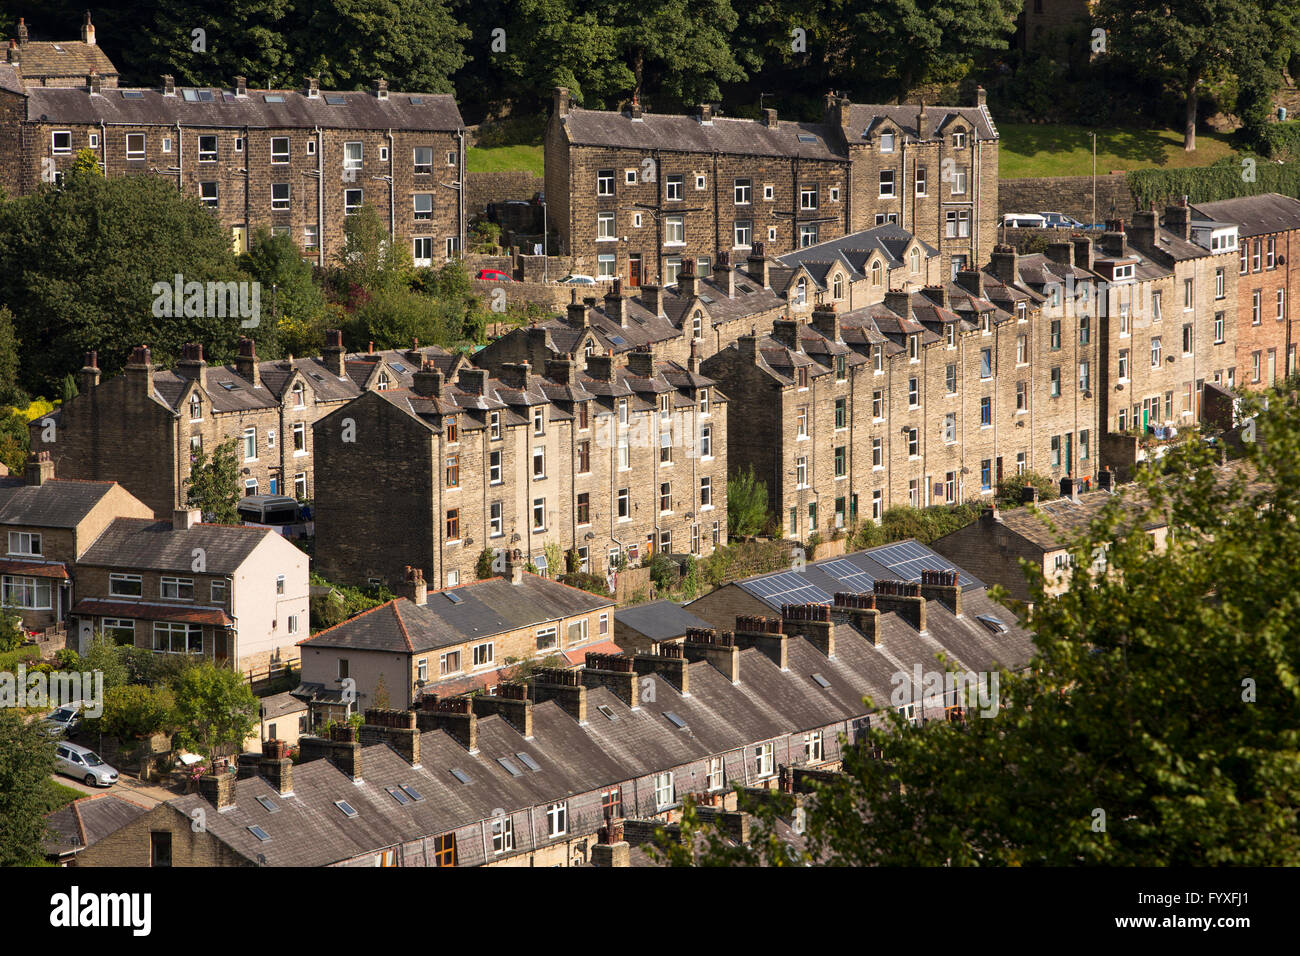 UK, England, Yorkshire, Calderdale, Hebden Bridge, five storey, flying freehold ‘upstairs downstairs’ houses Stock Photo